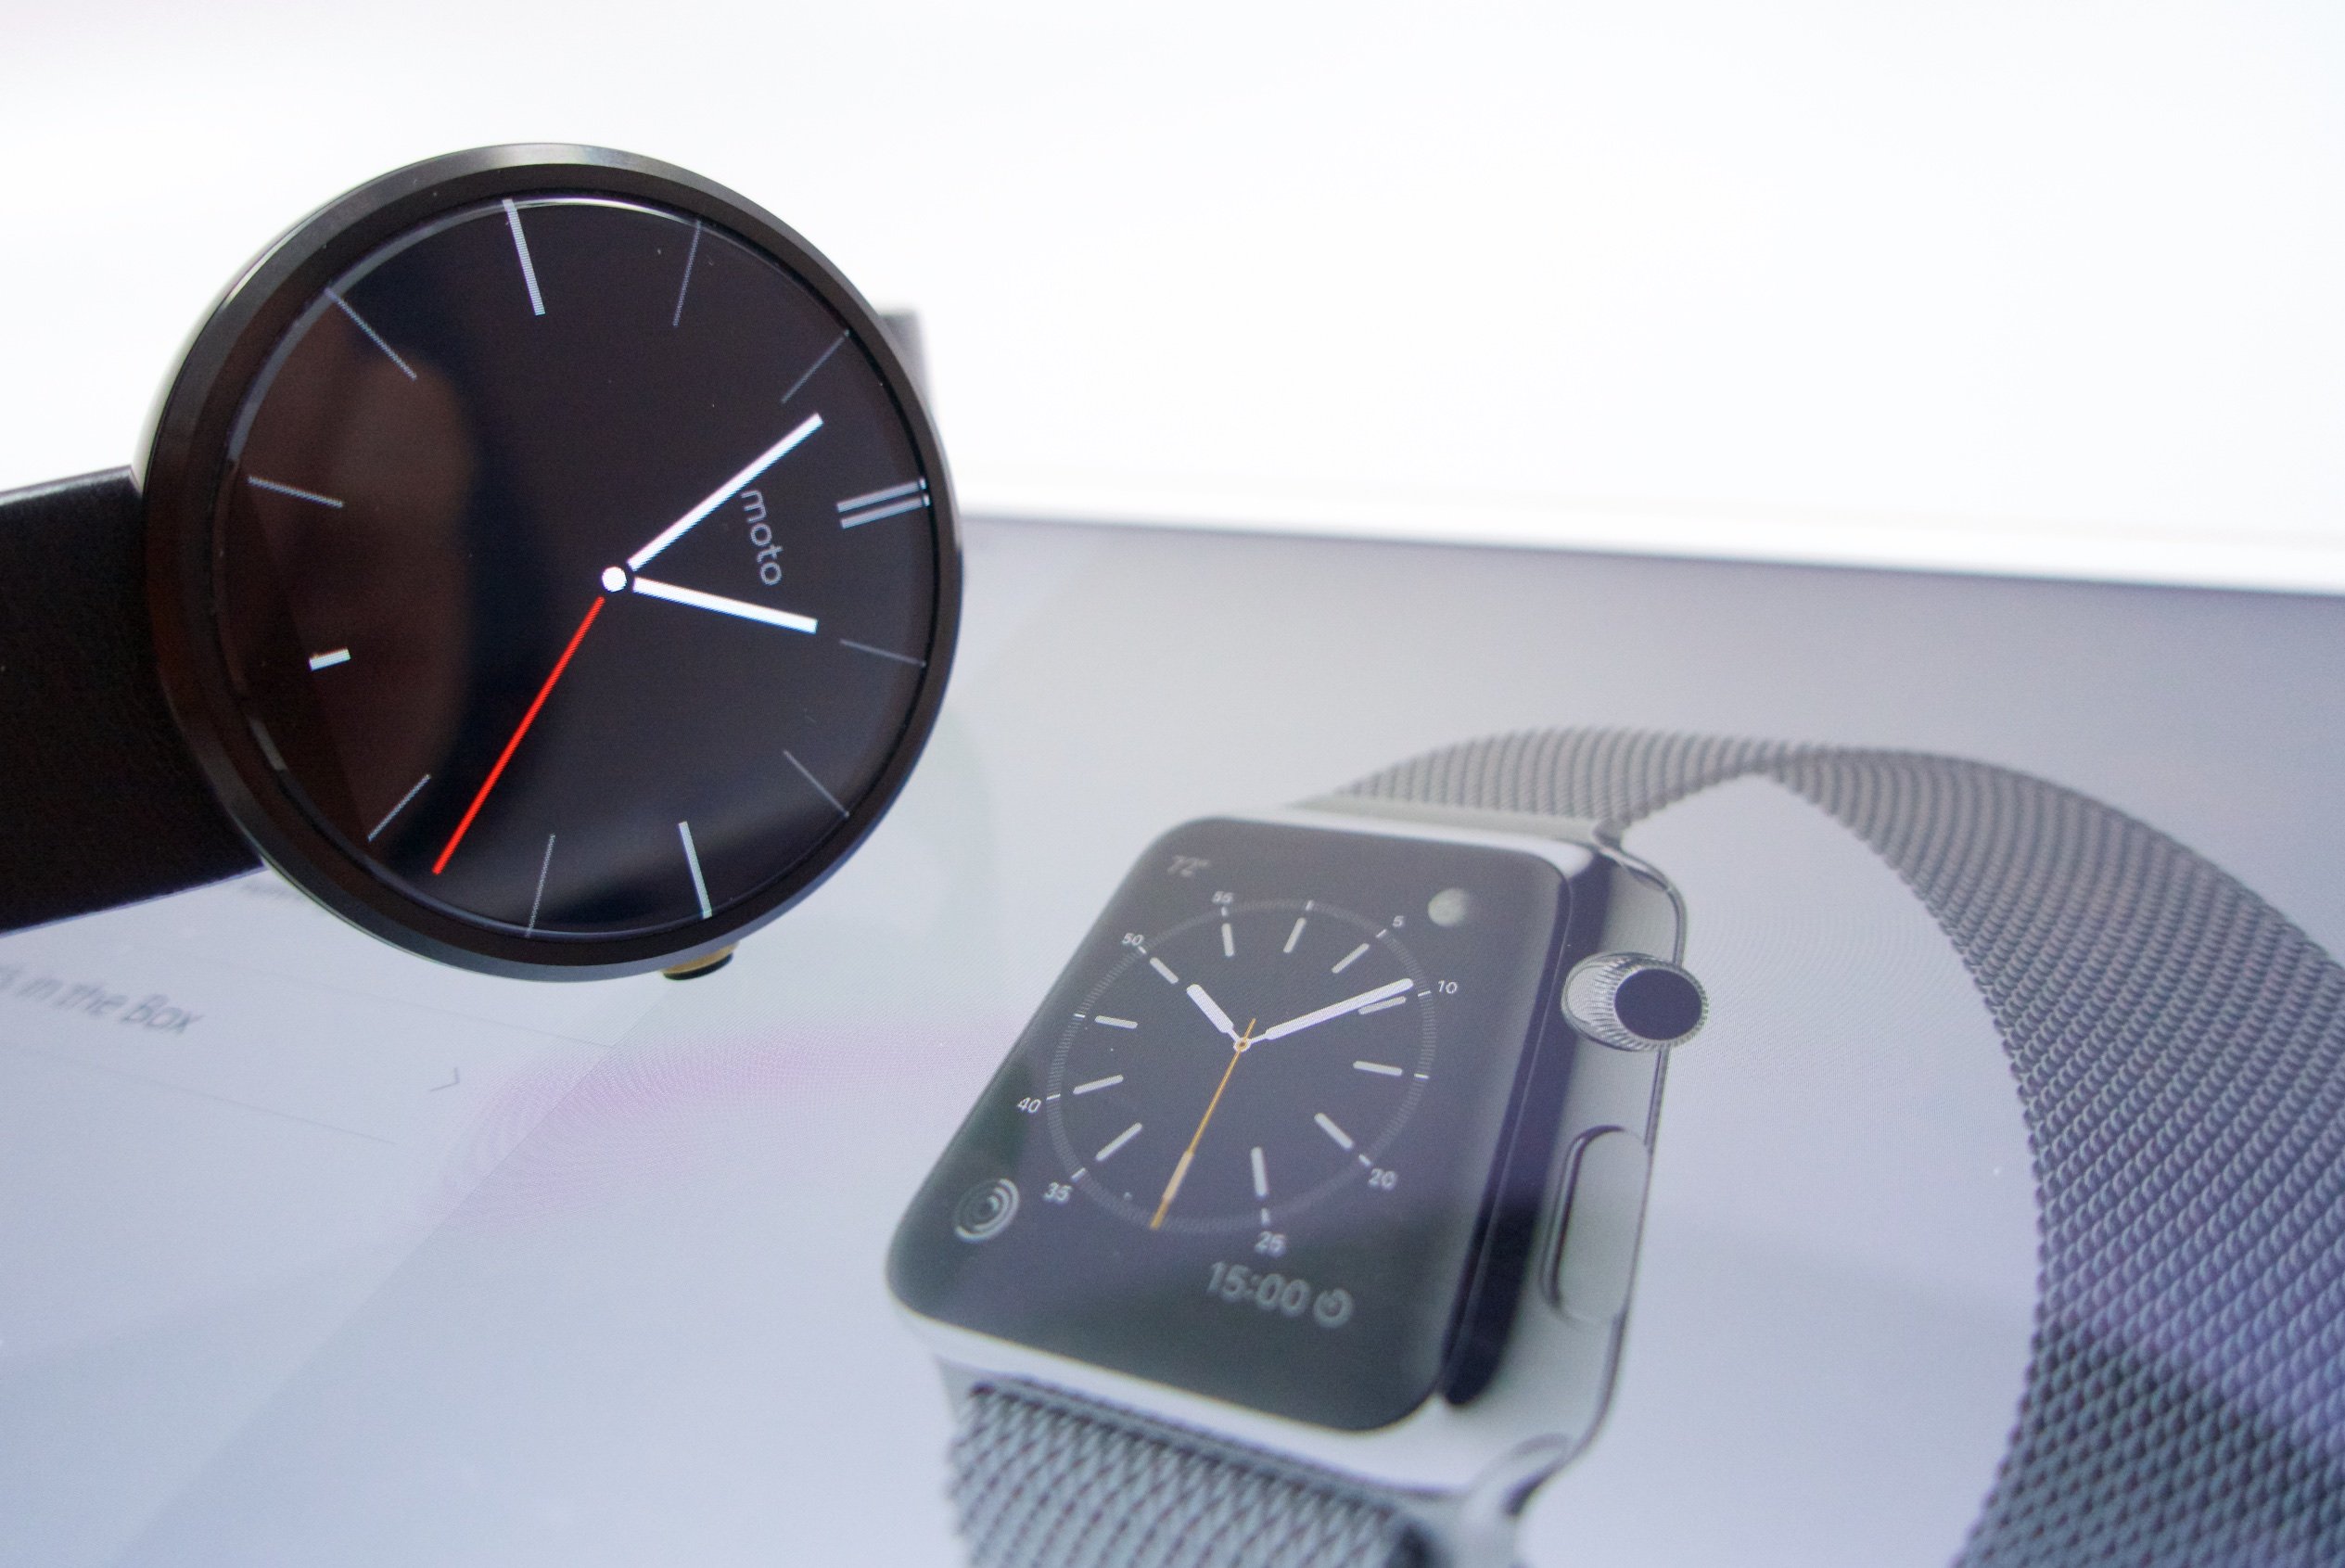 Learn how the Apple Watch vs Moto 360 comparison stacks up.